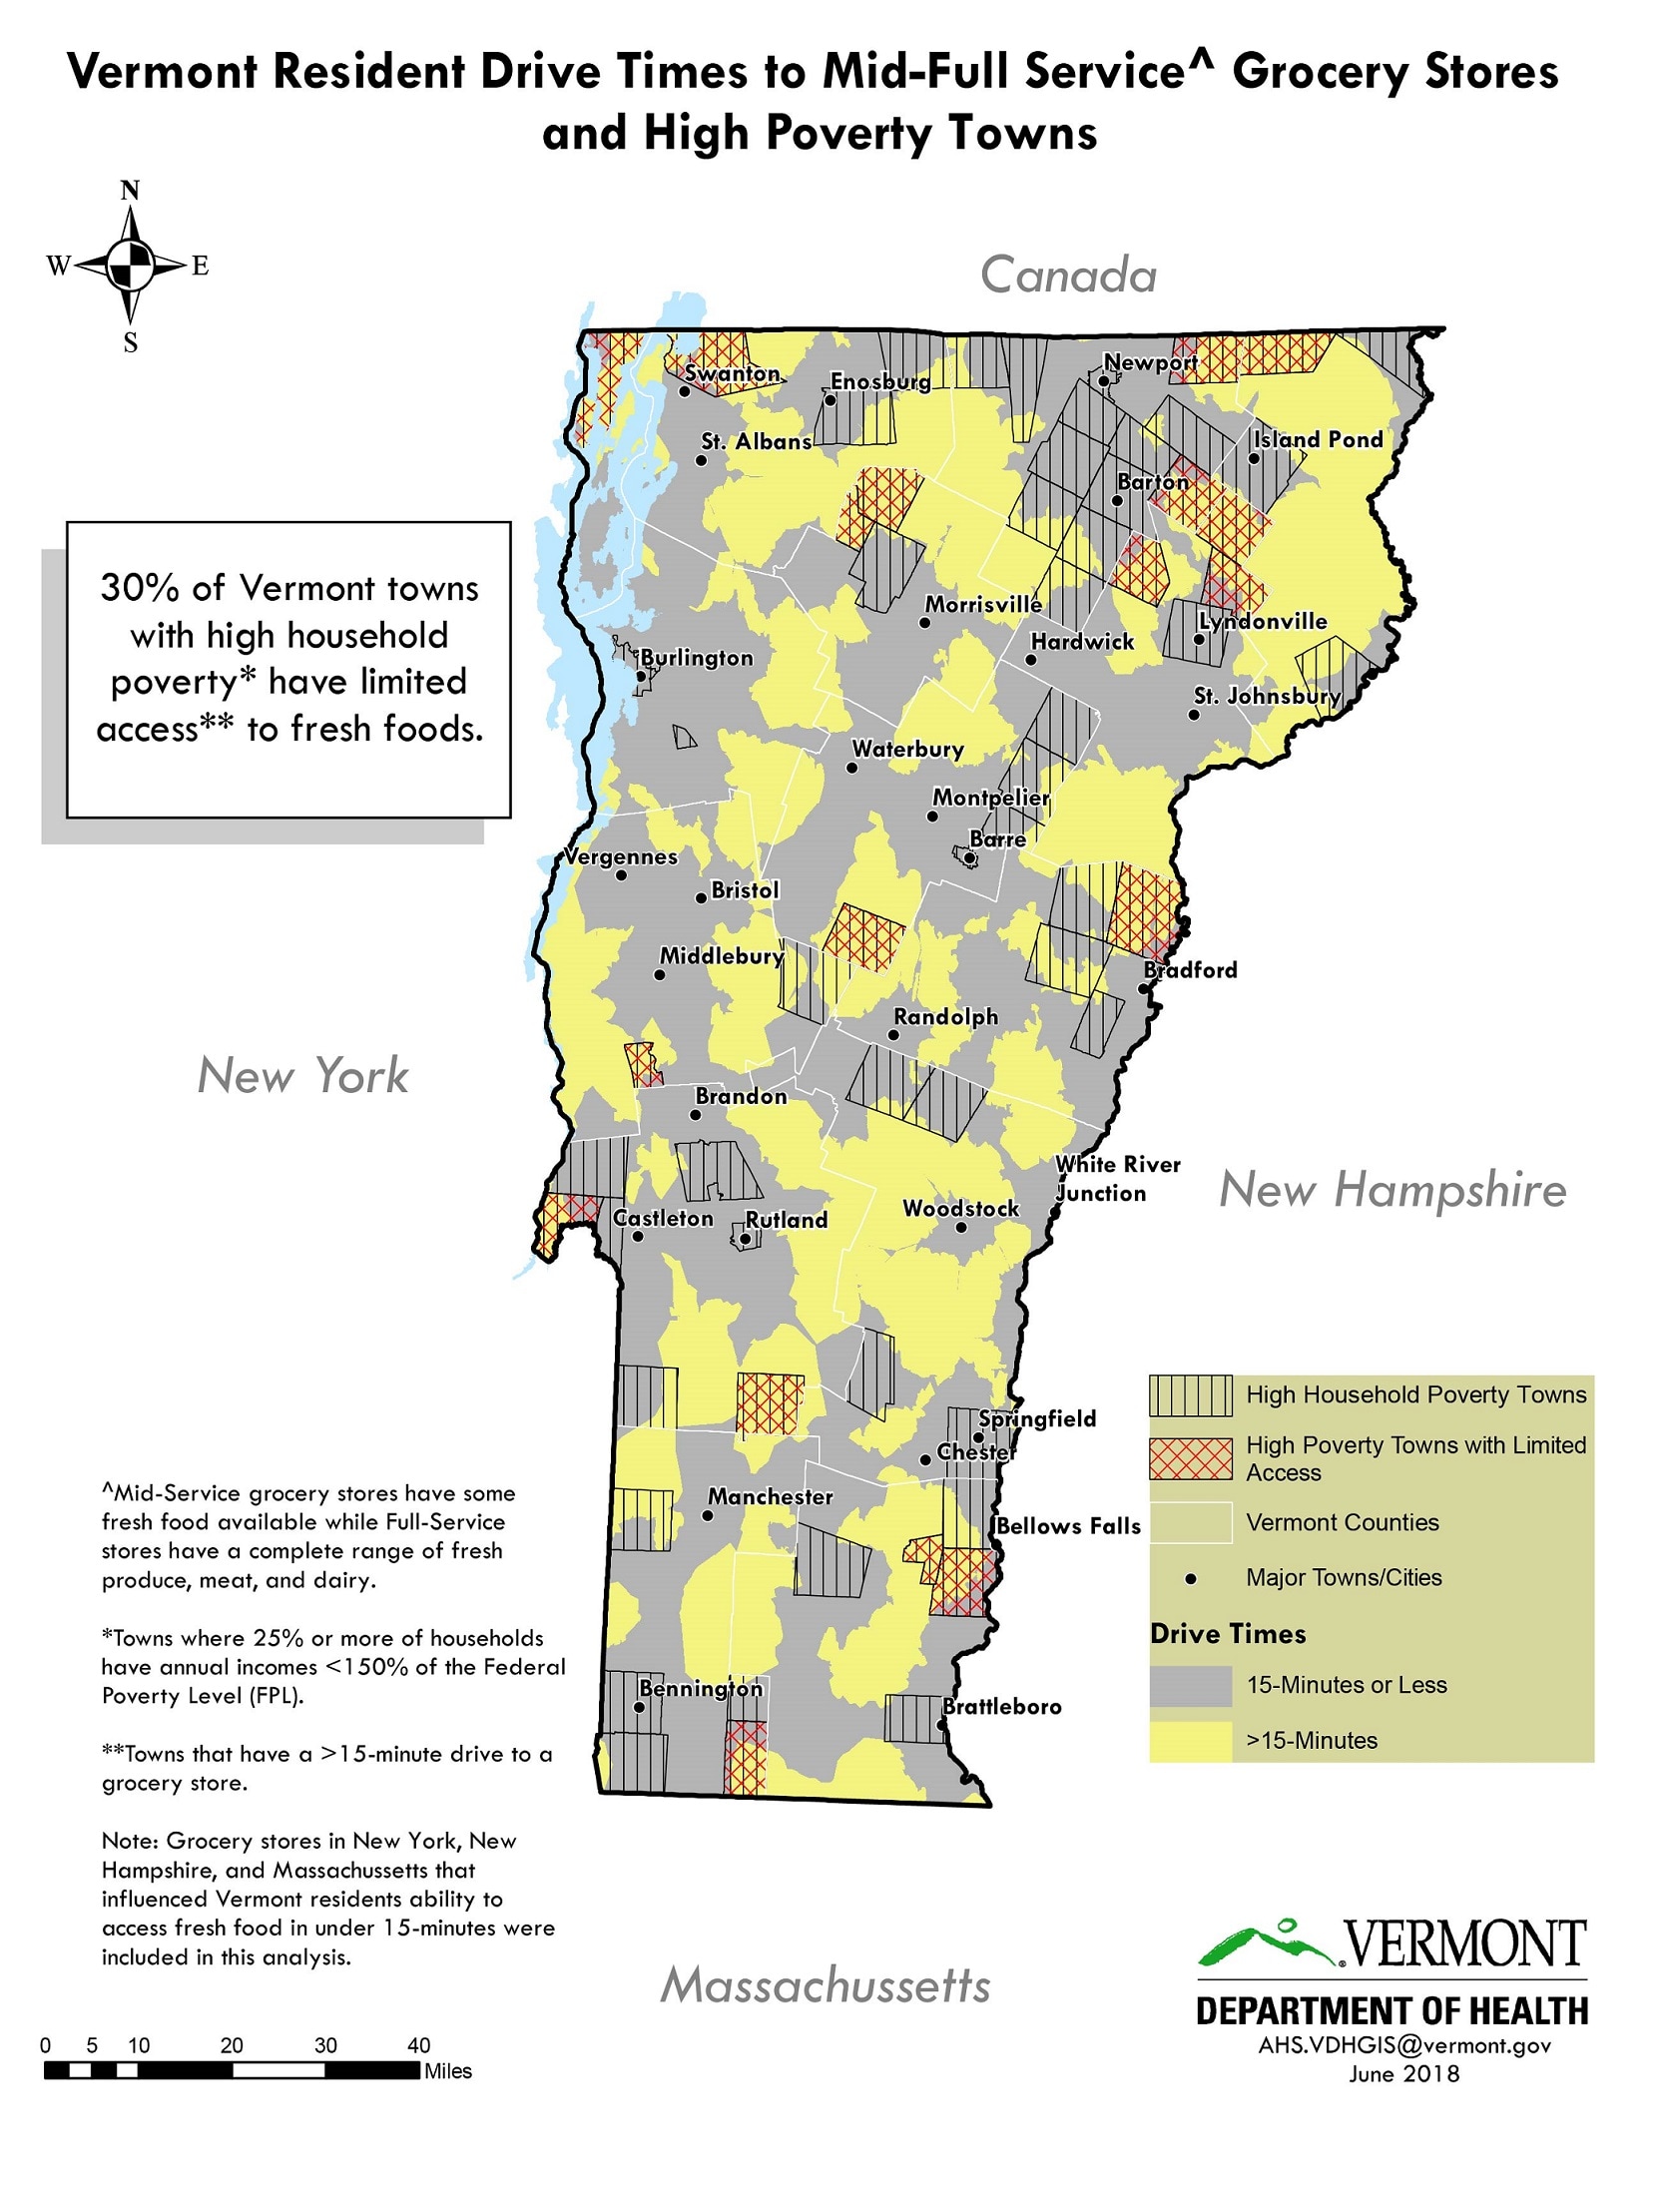 Vermont Resident Drive Times to Mid-Full Service Grocery Stores and High Poverty Towns